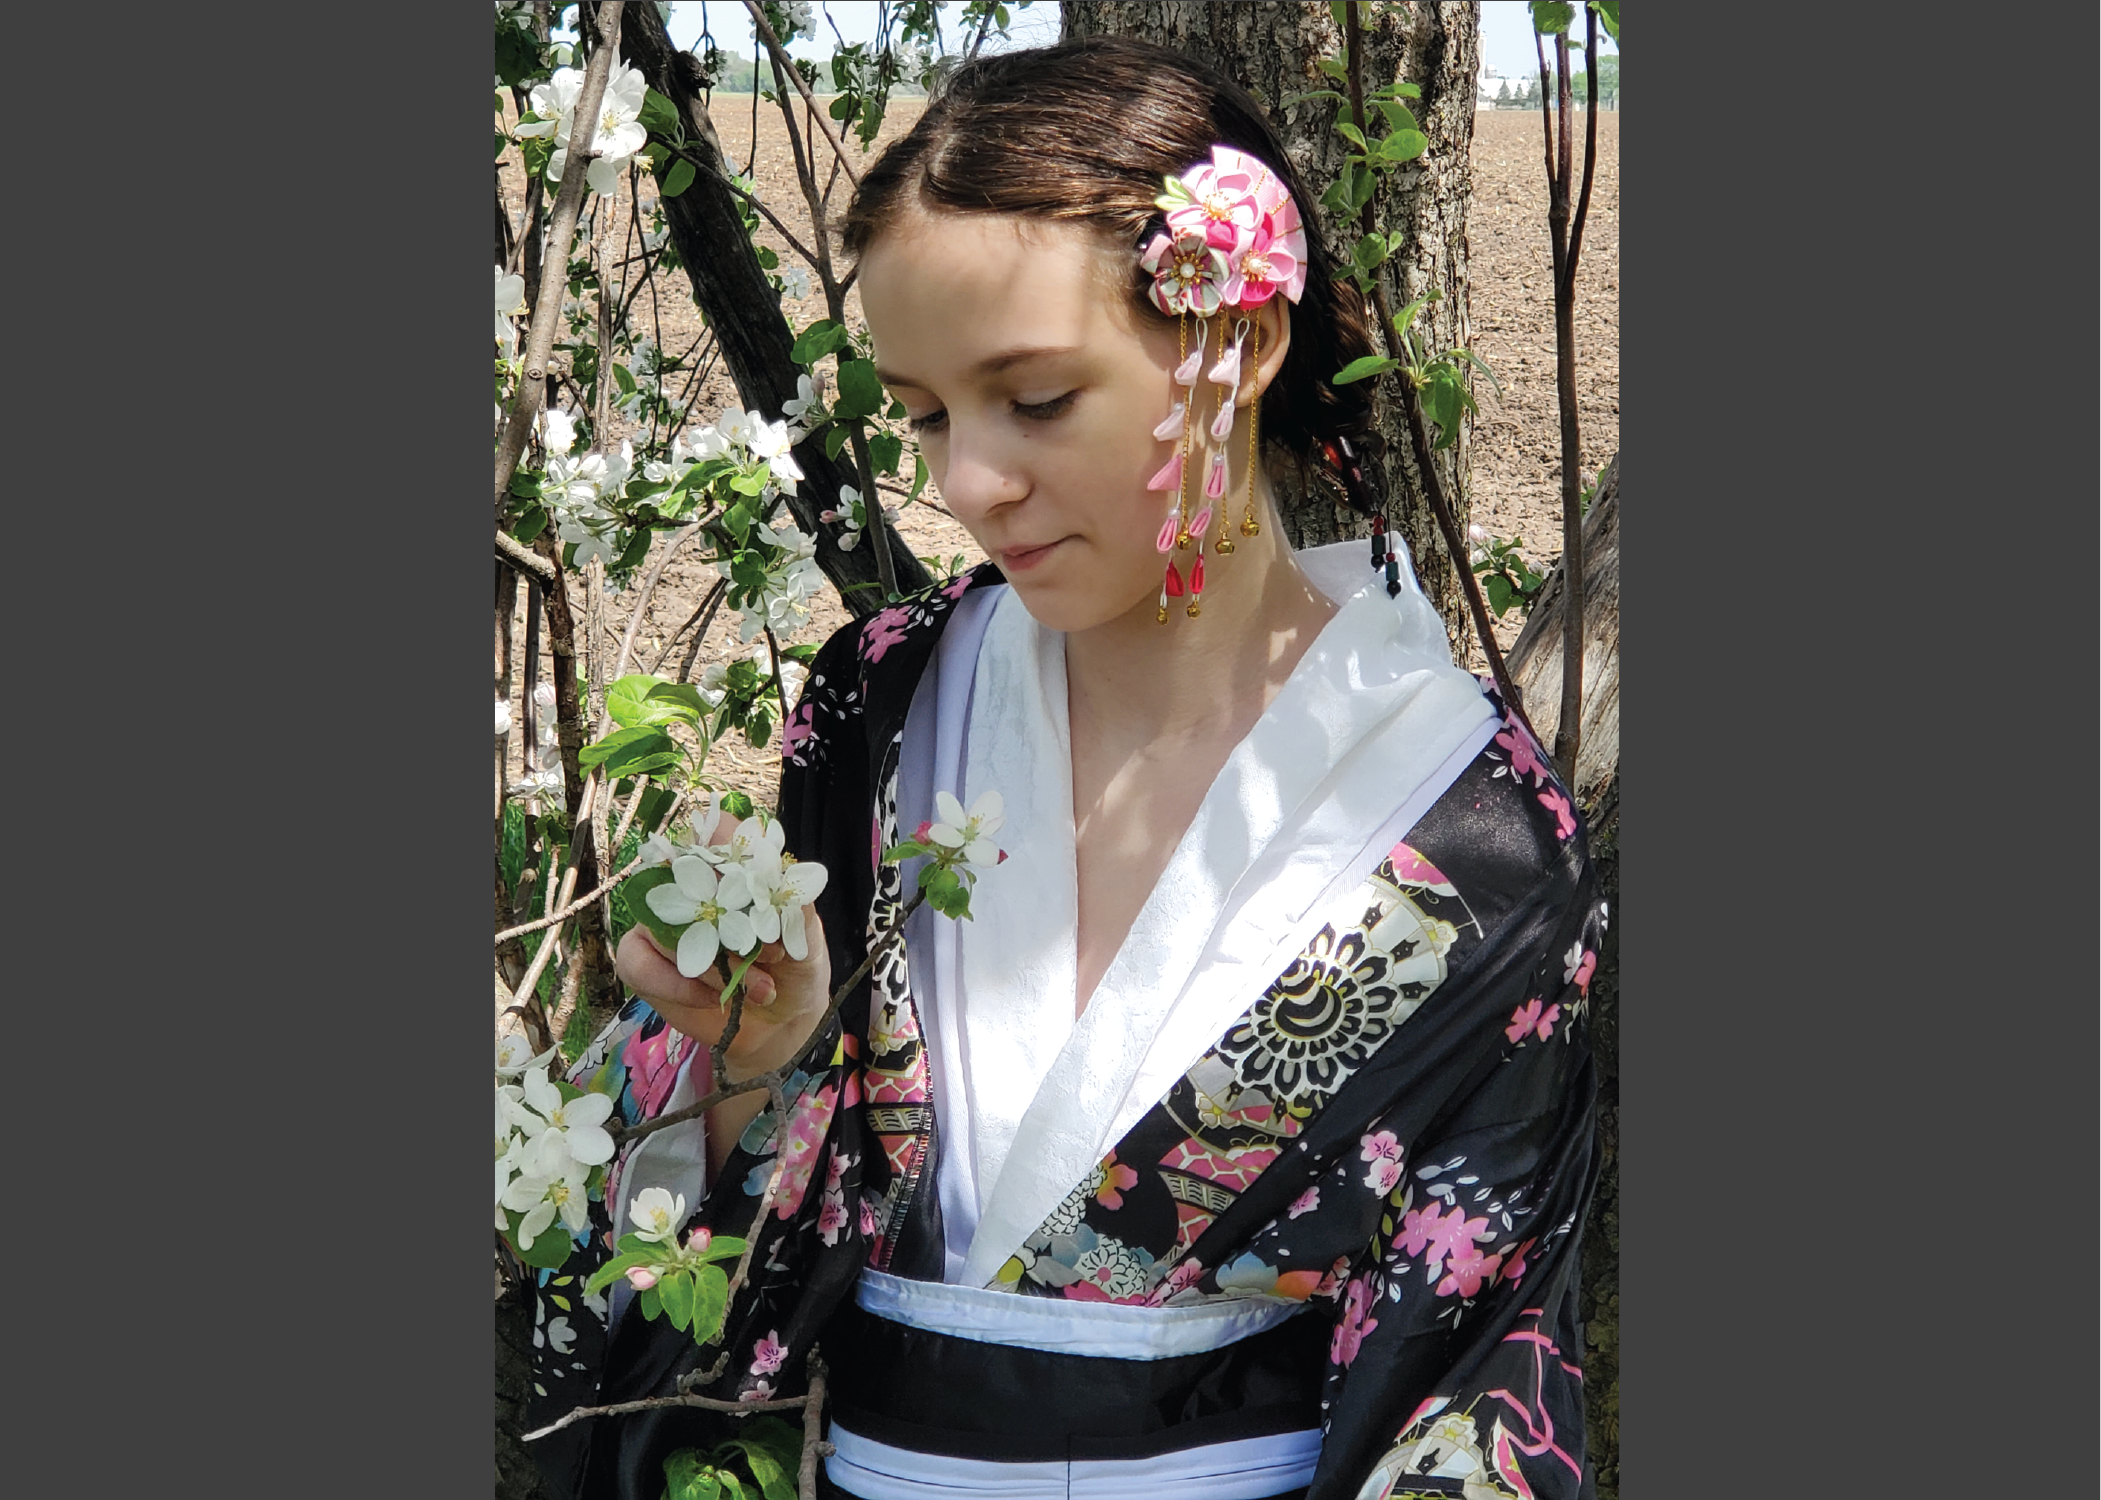 Portrait of a fairskinned girl in japanese garb under a flowering tree looking at a white blossom.